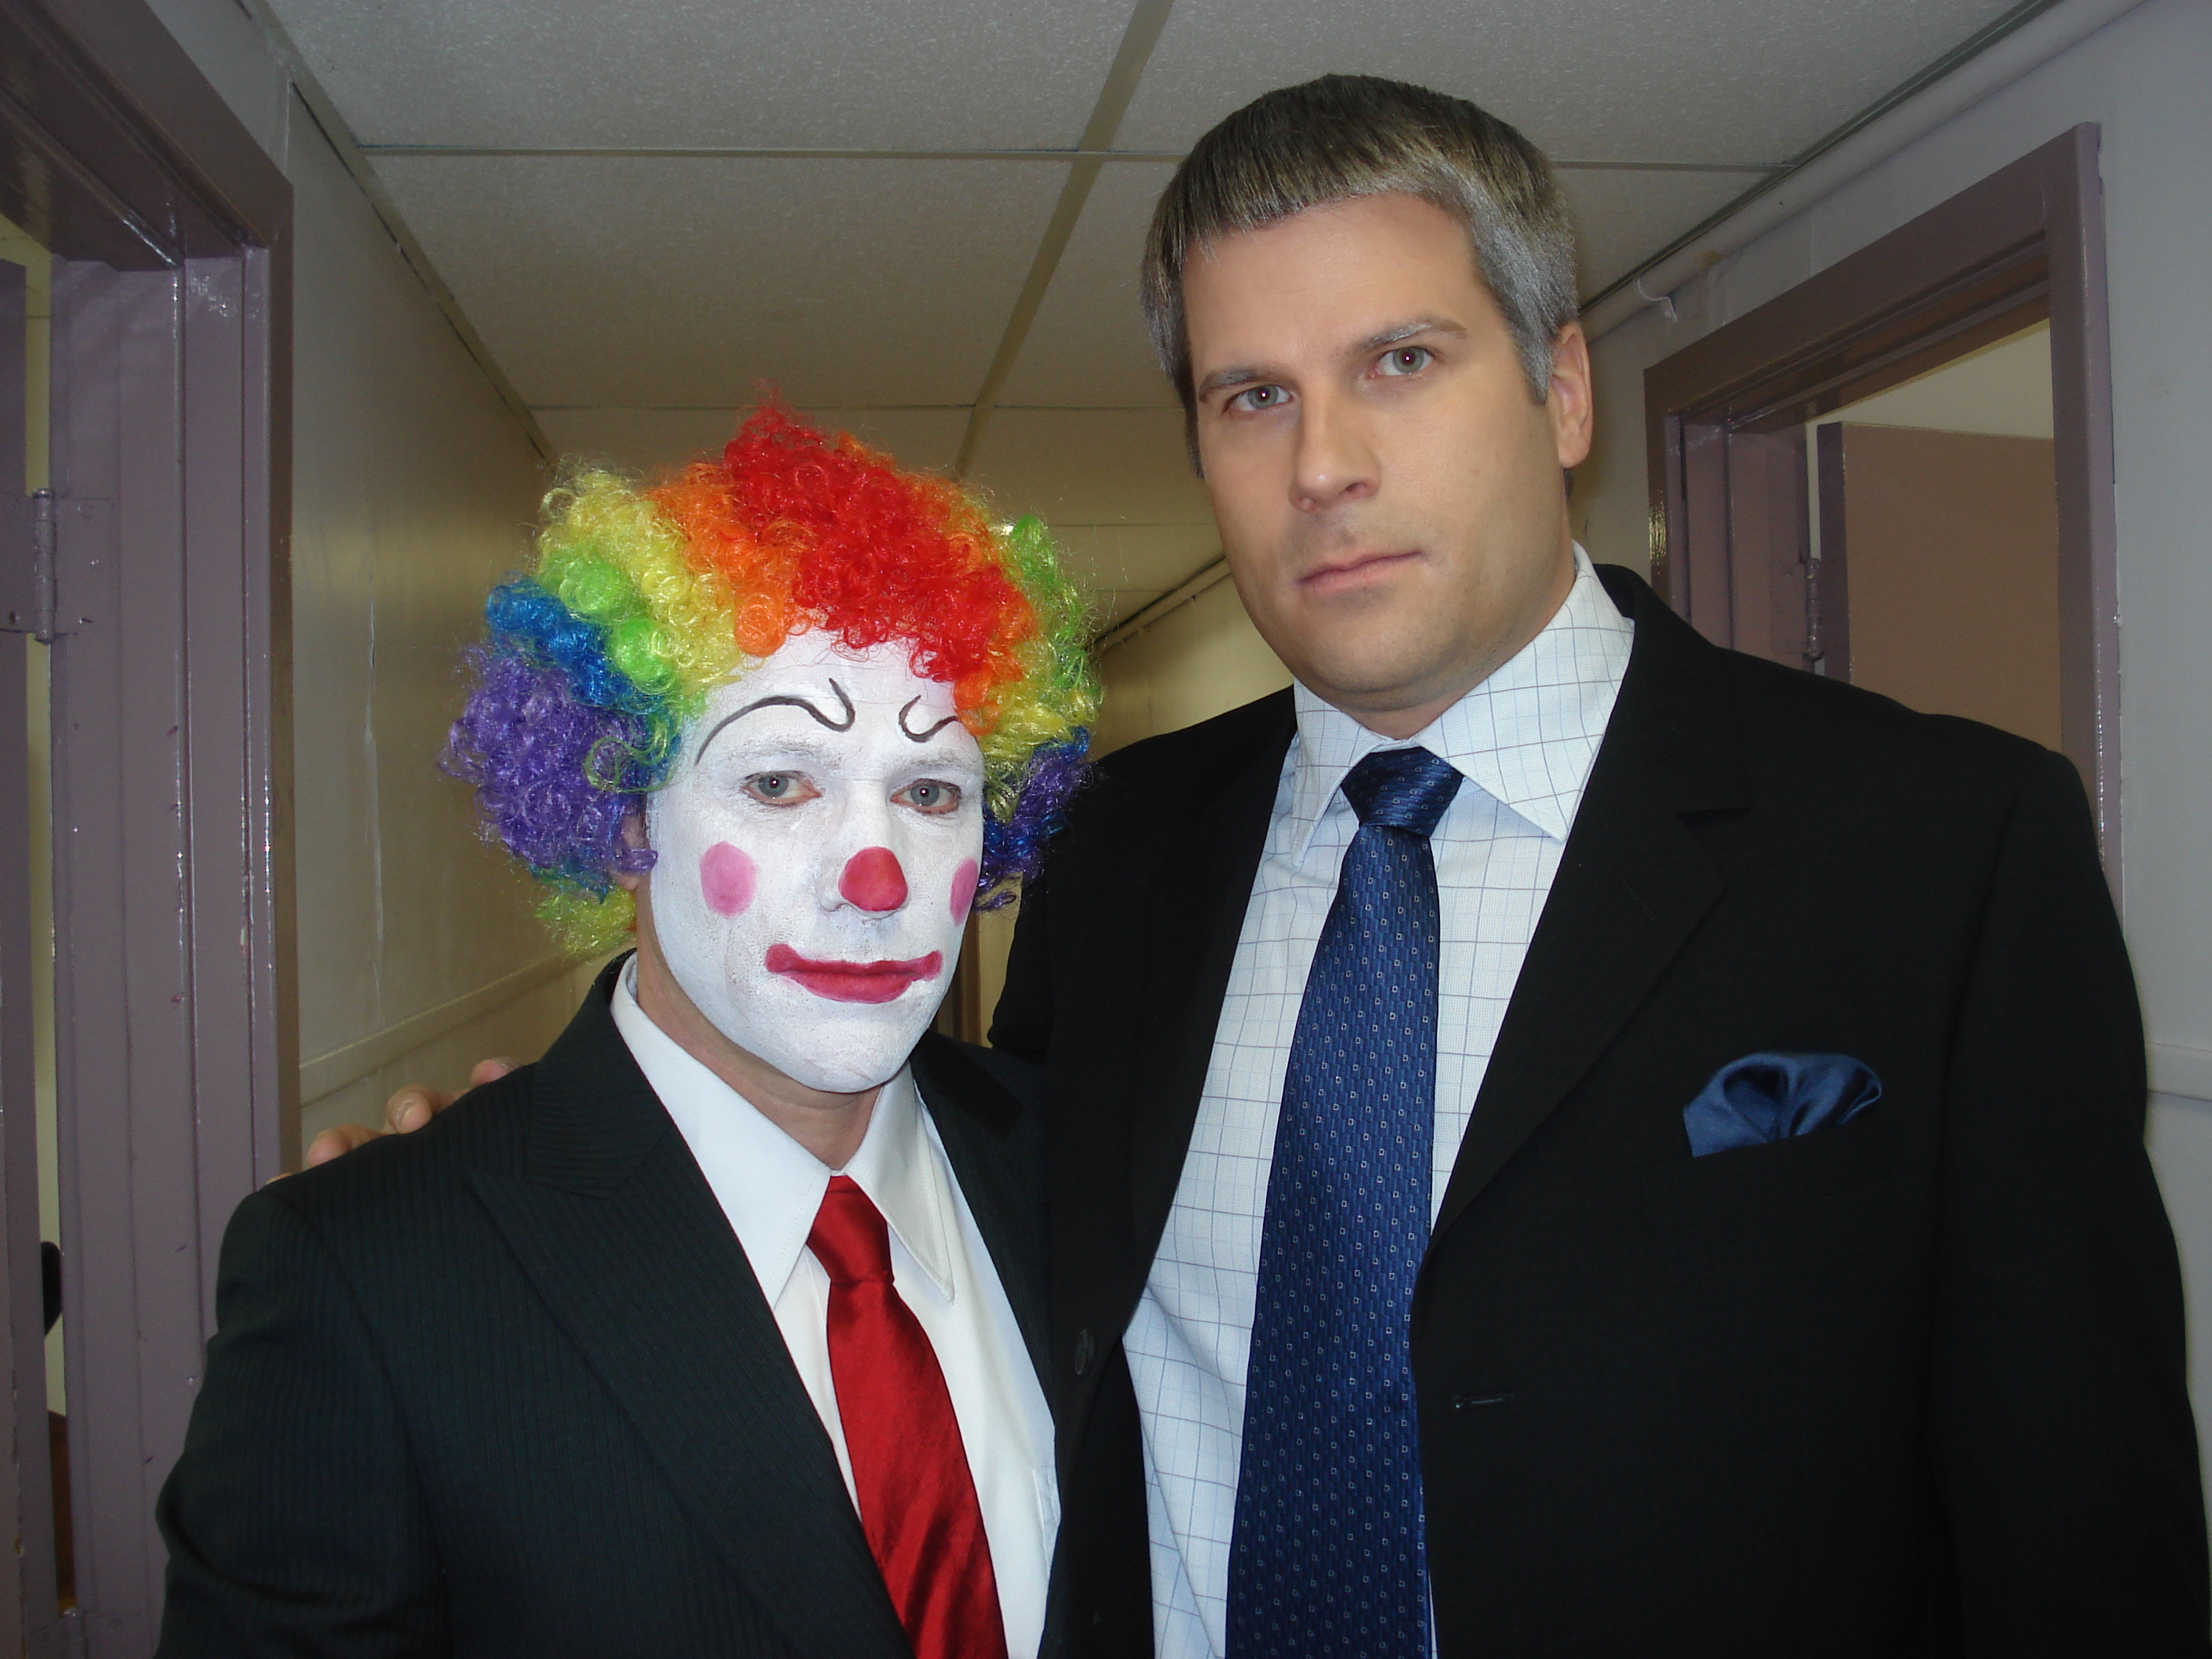 As President Clown on Hotbox comedy series.